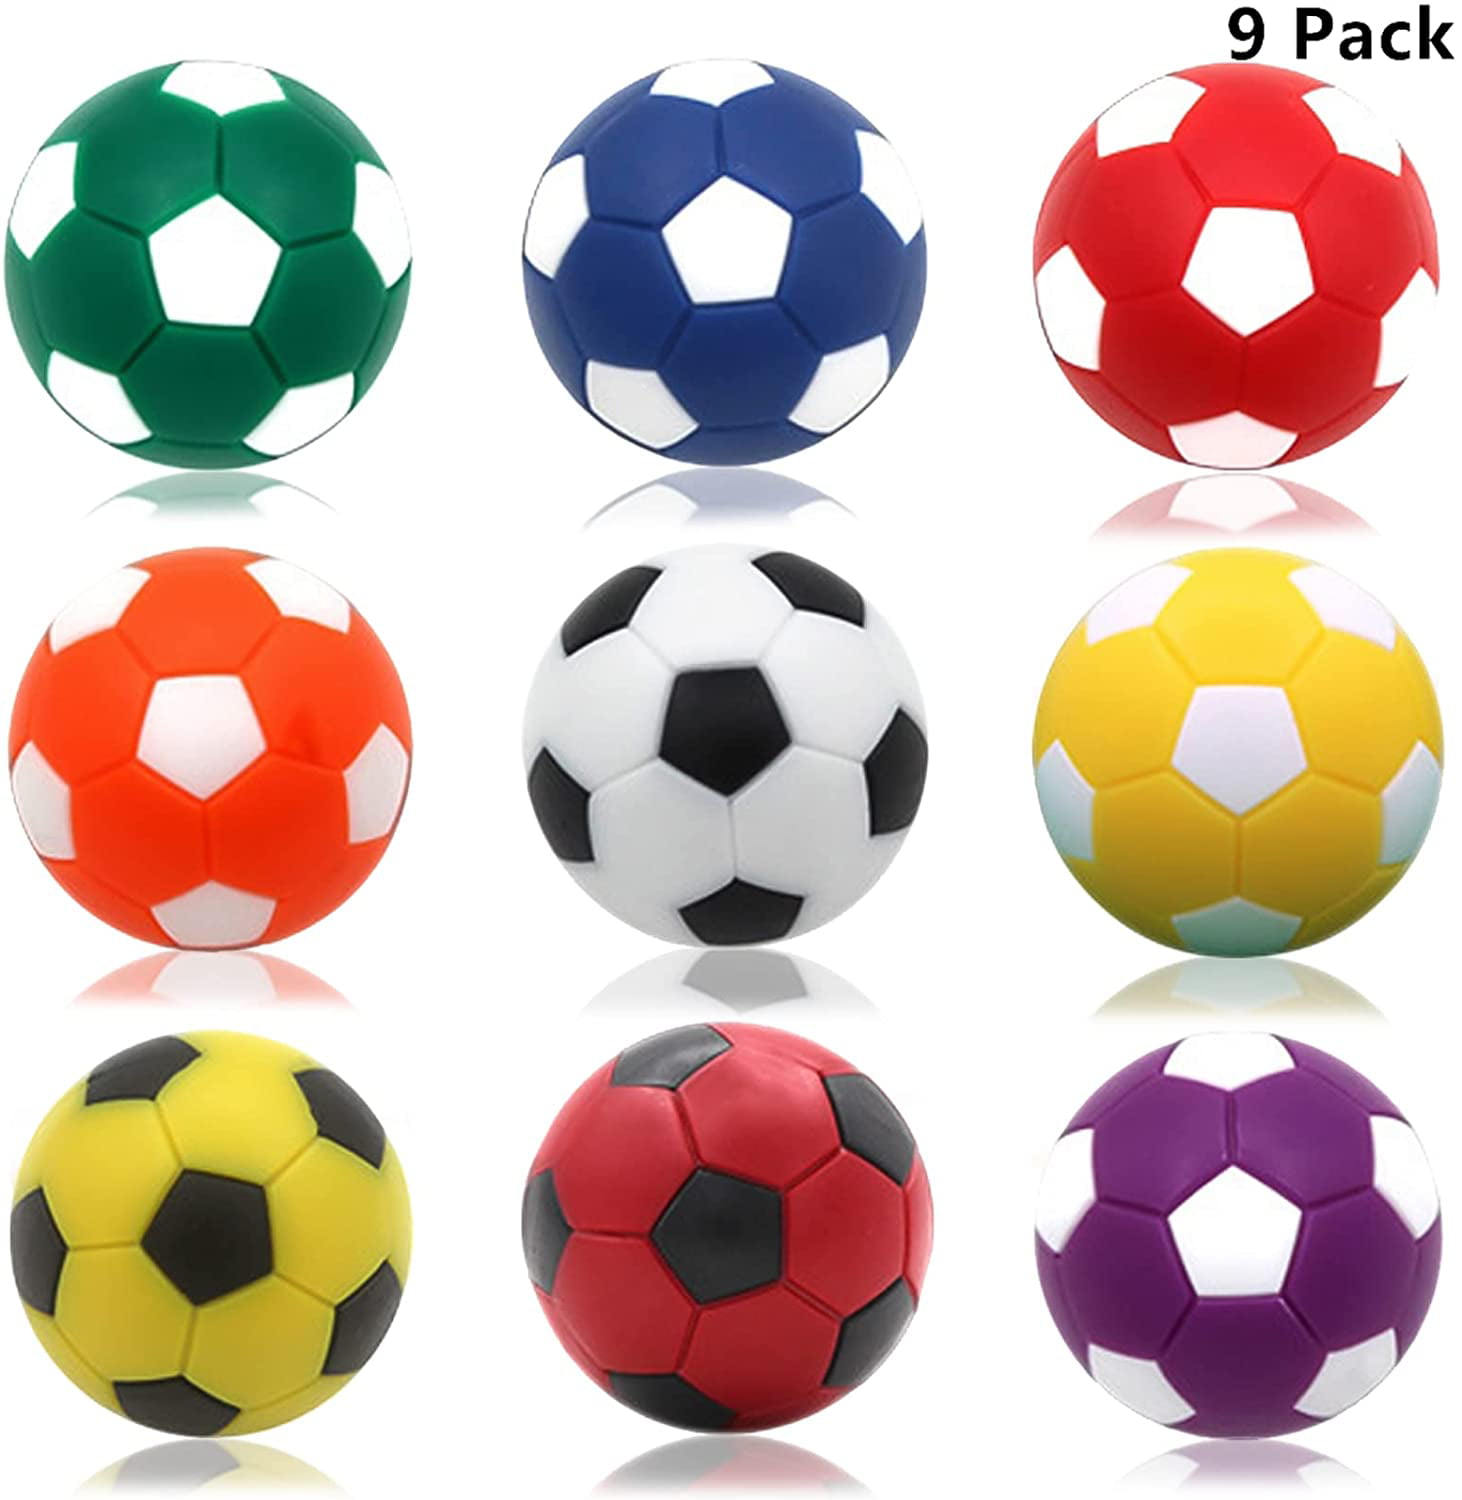 4 Pieces Foosball Men Man Football Players Tournament Replacement Accessory 